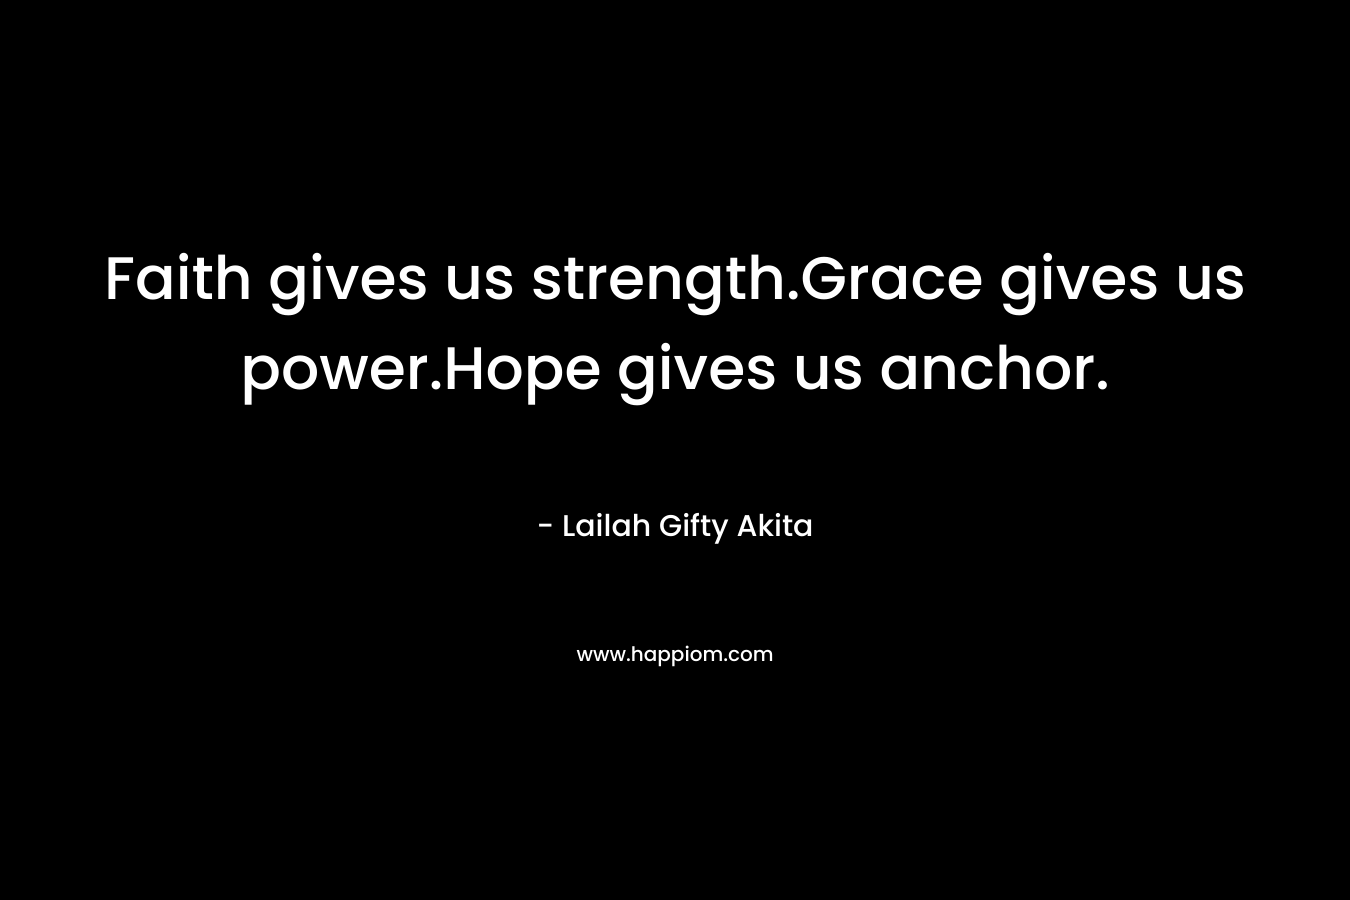 Faith gives us strength.Grace gives us power.Hope gives us anchor.